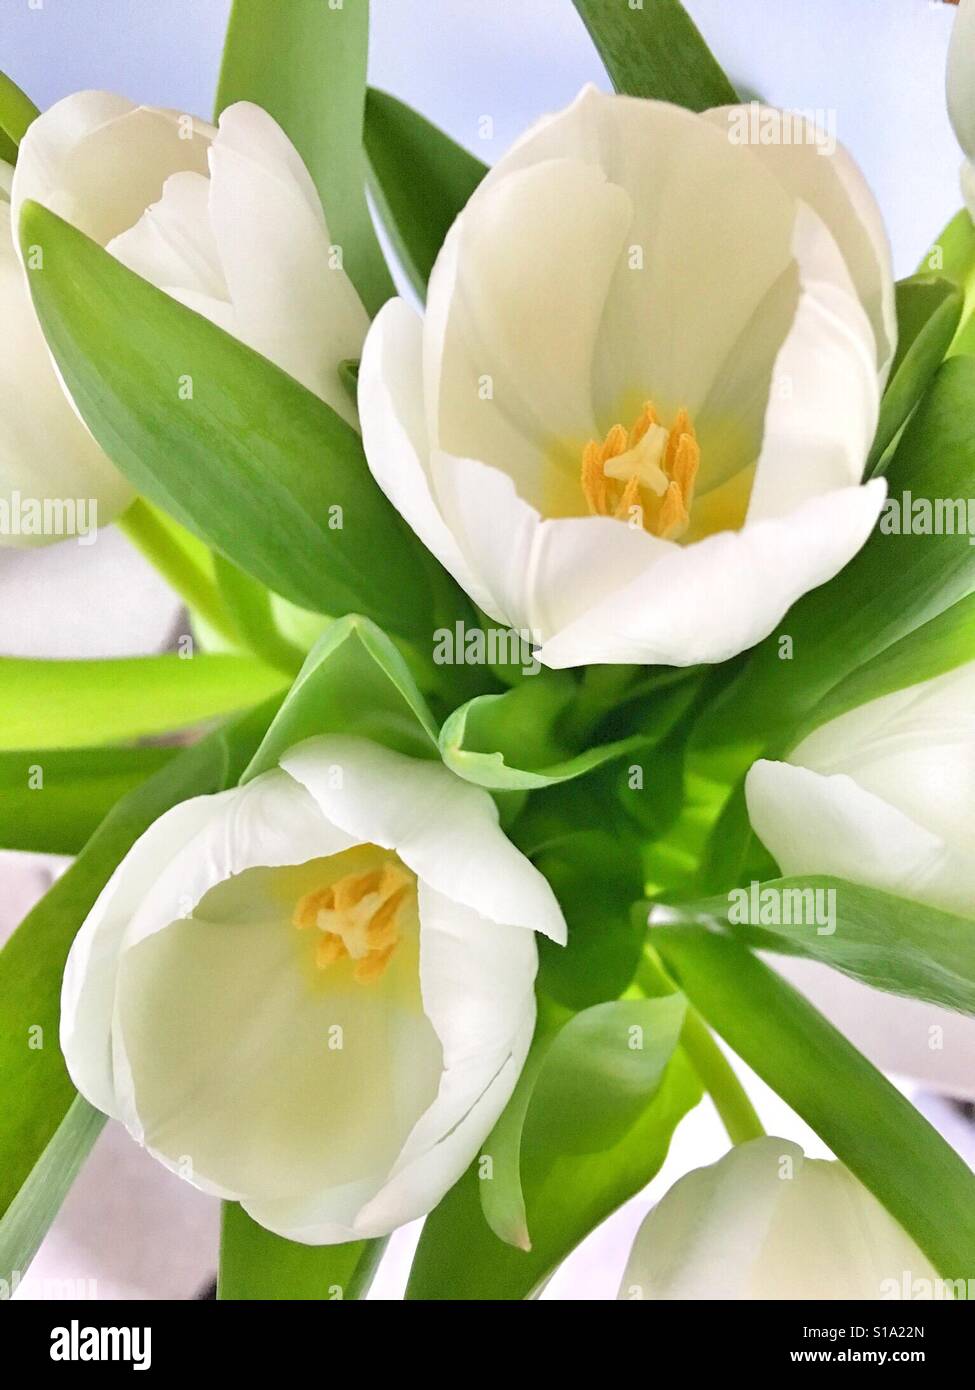 Open white tulips showing stamens Stock Photo